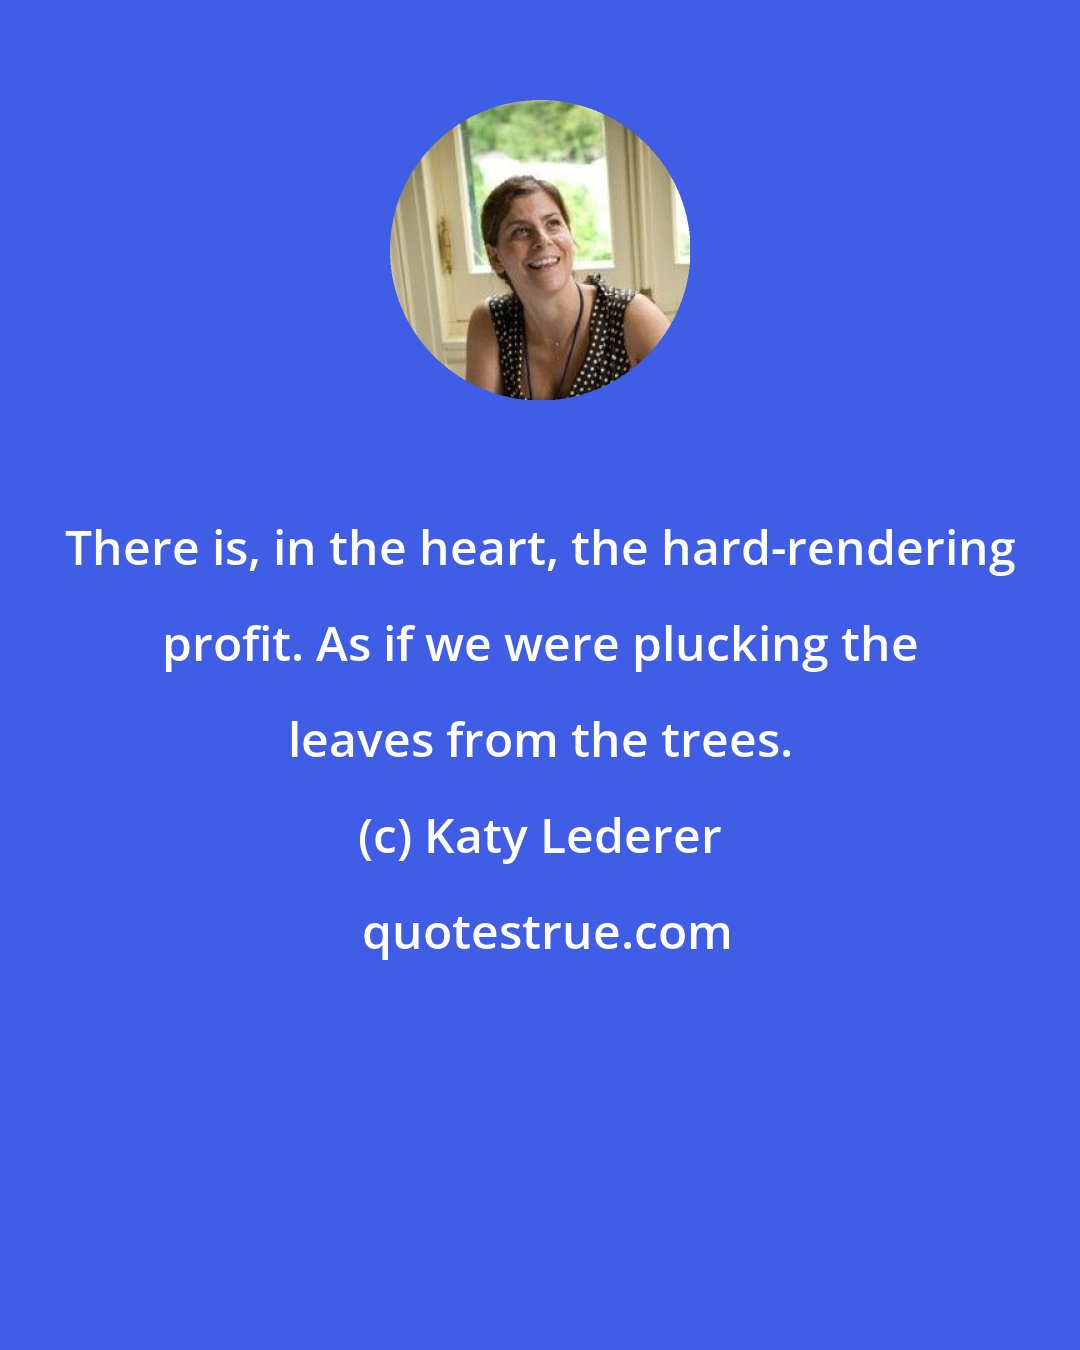 Katy Lederer: There is, in the heart, the hard-rendering profit. As if we were plucking the leaves from the trees.